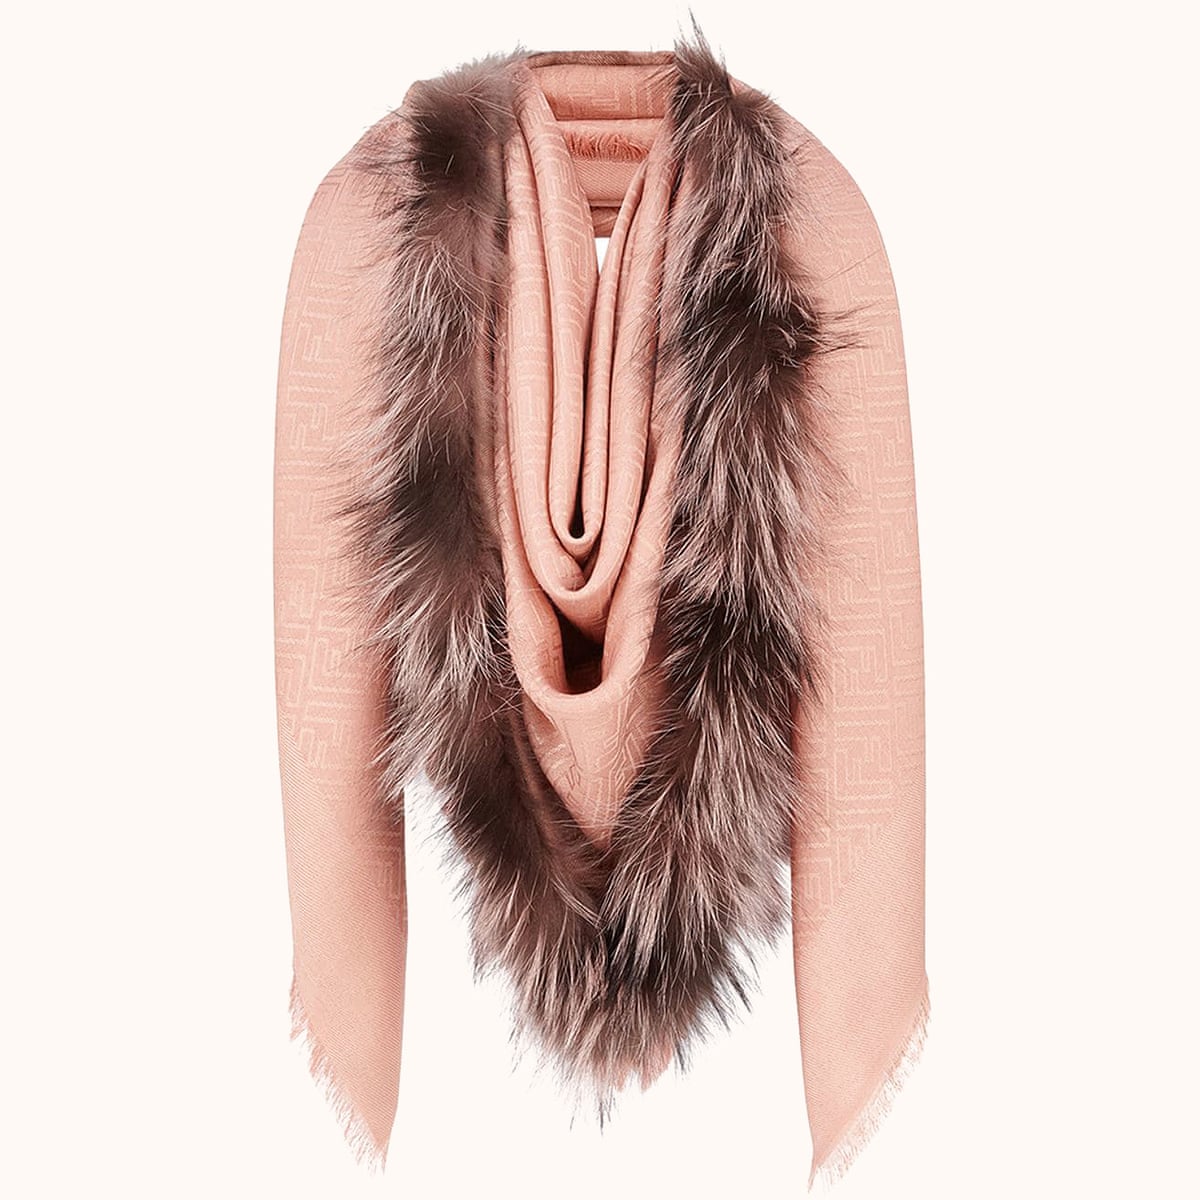 Fendi's £750 'vulva' scarf makes wearers look like they're being born, Accessories